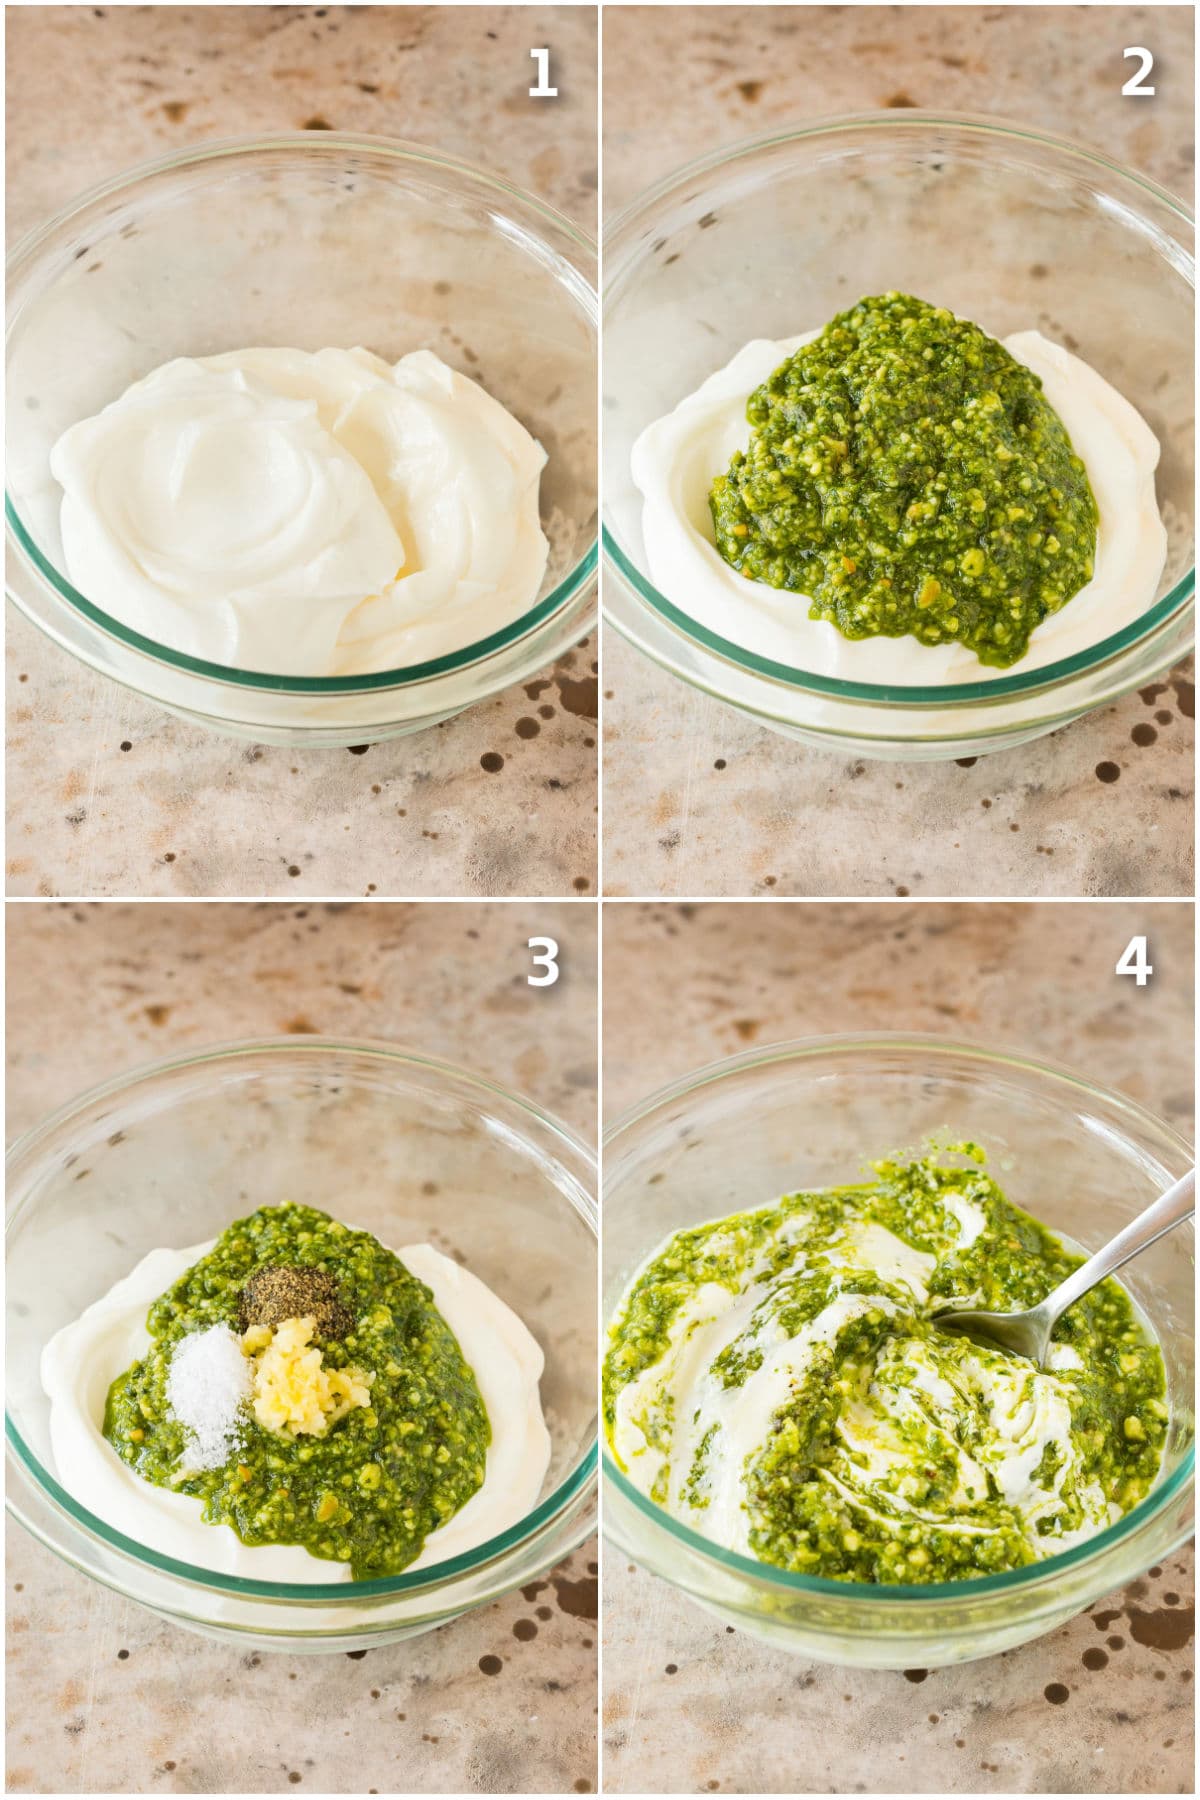 Step by step photos showing how to make a creamy dip.